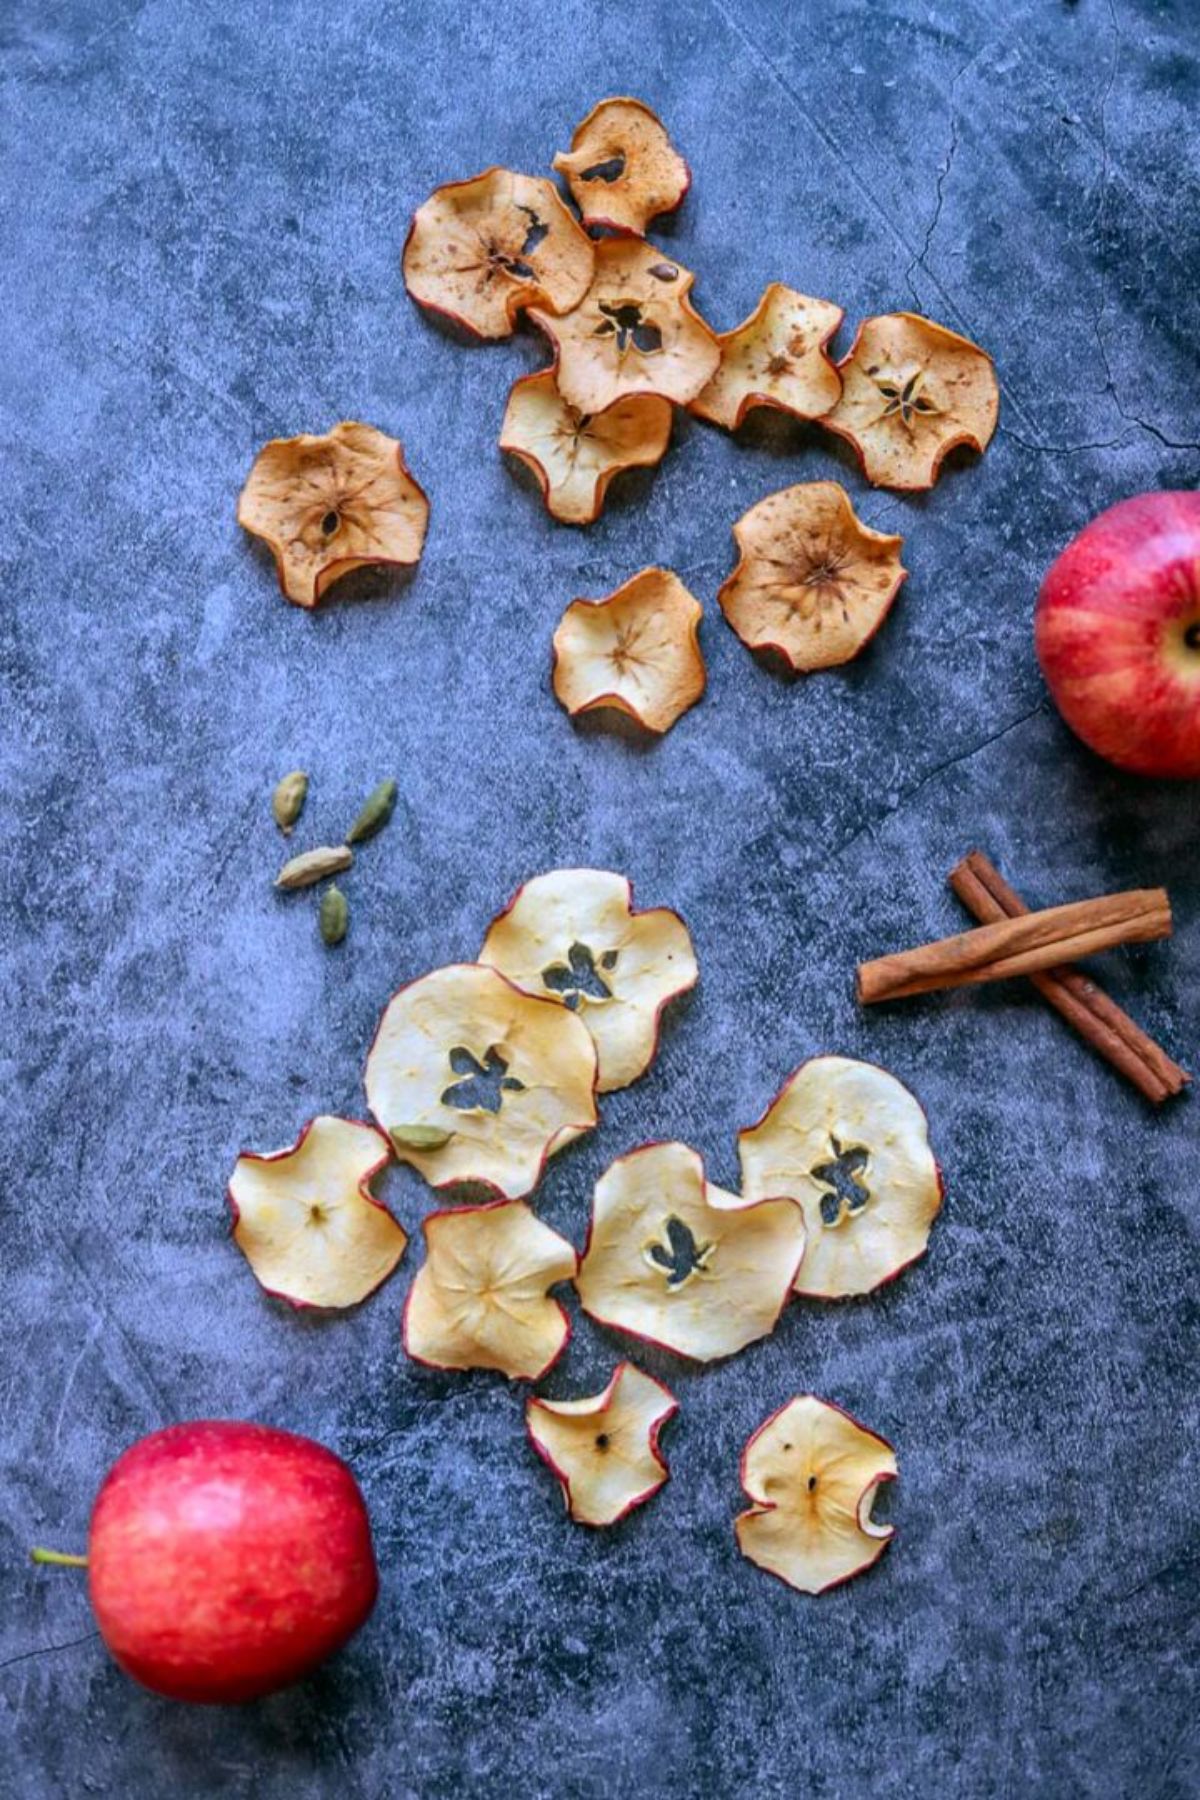 Dehydrated apple chips scattered on a table with cinnamon sticks and two red apples.